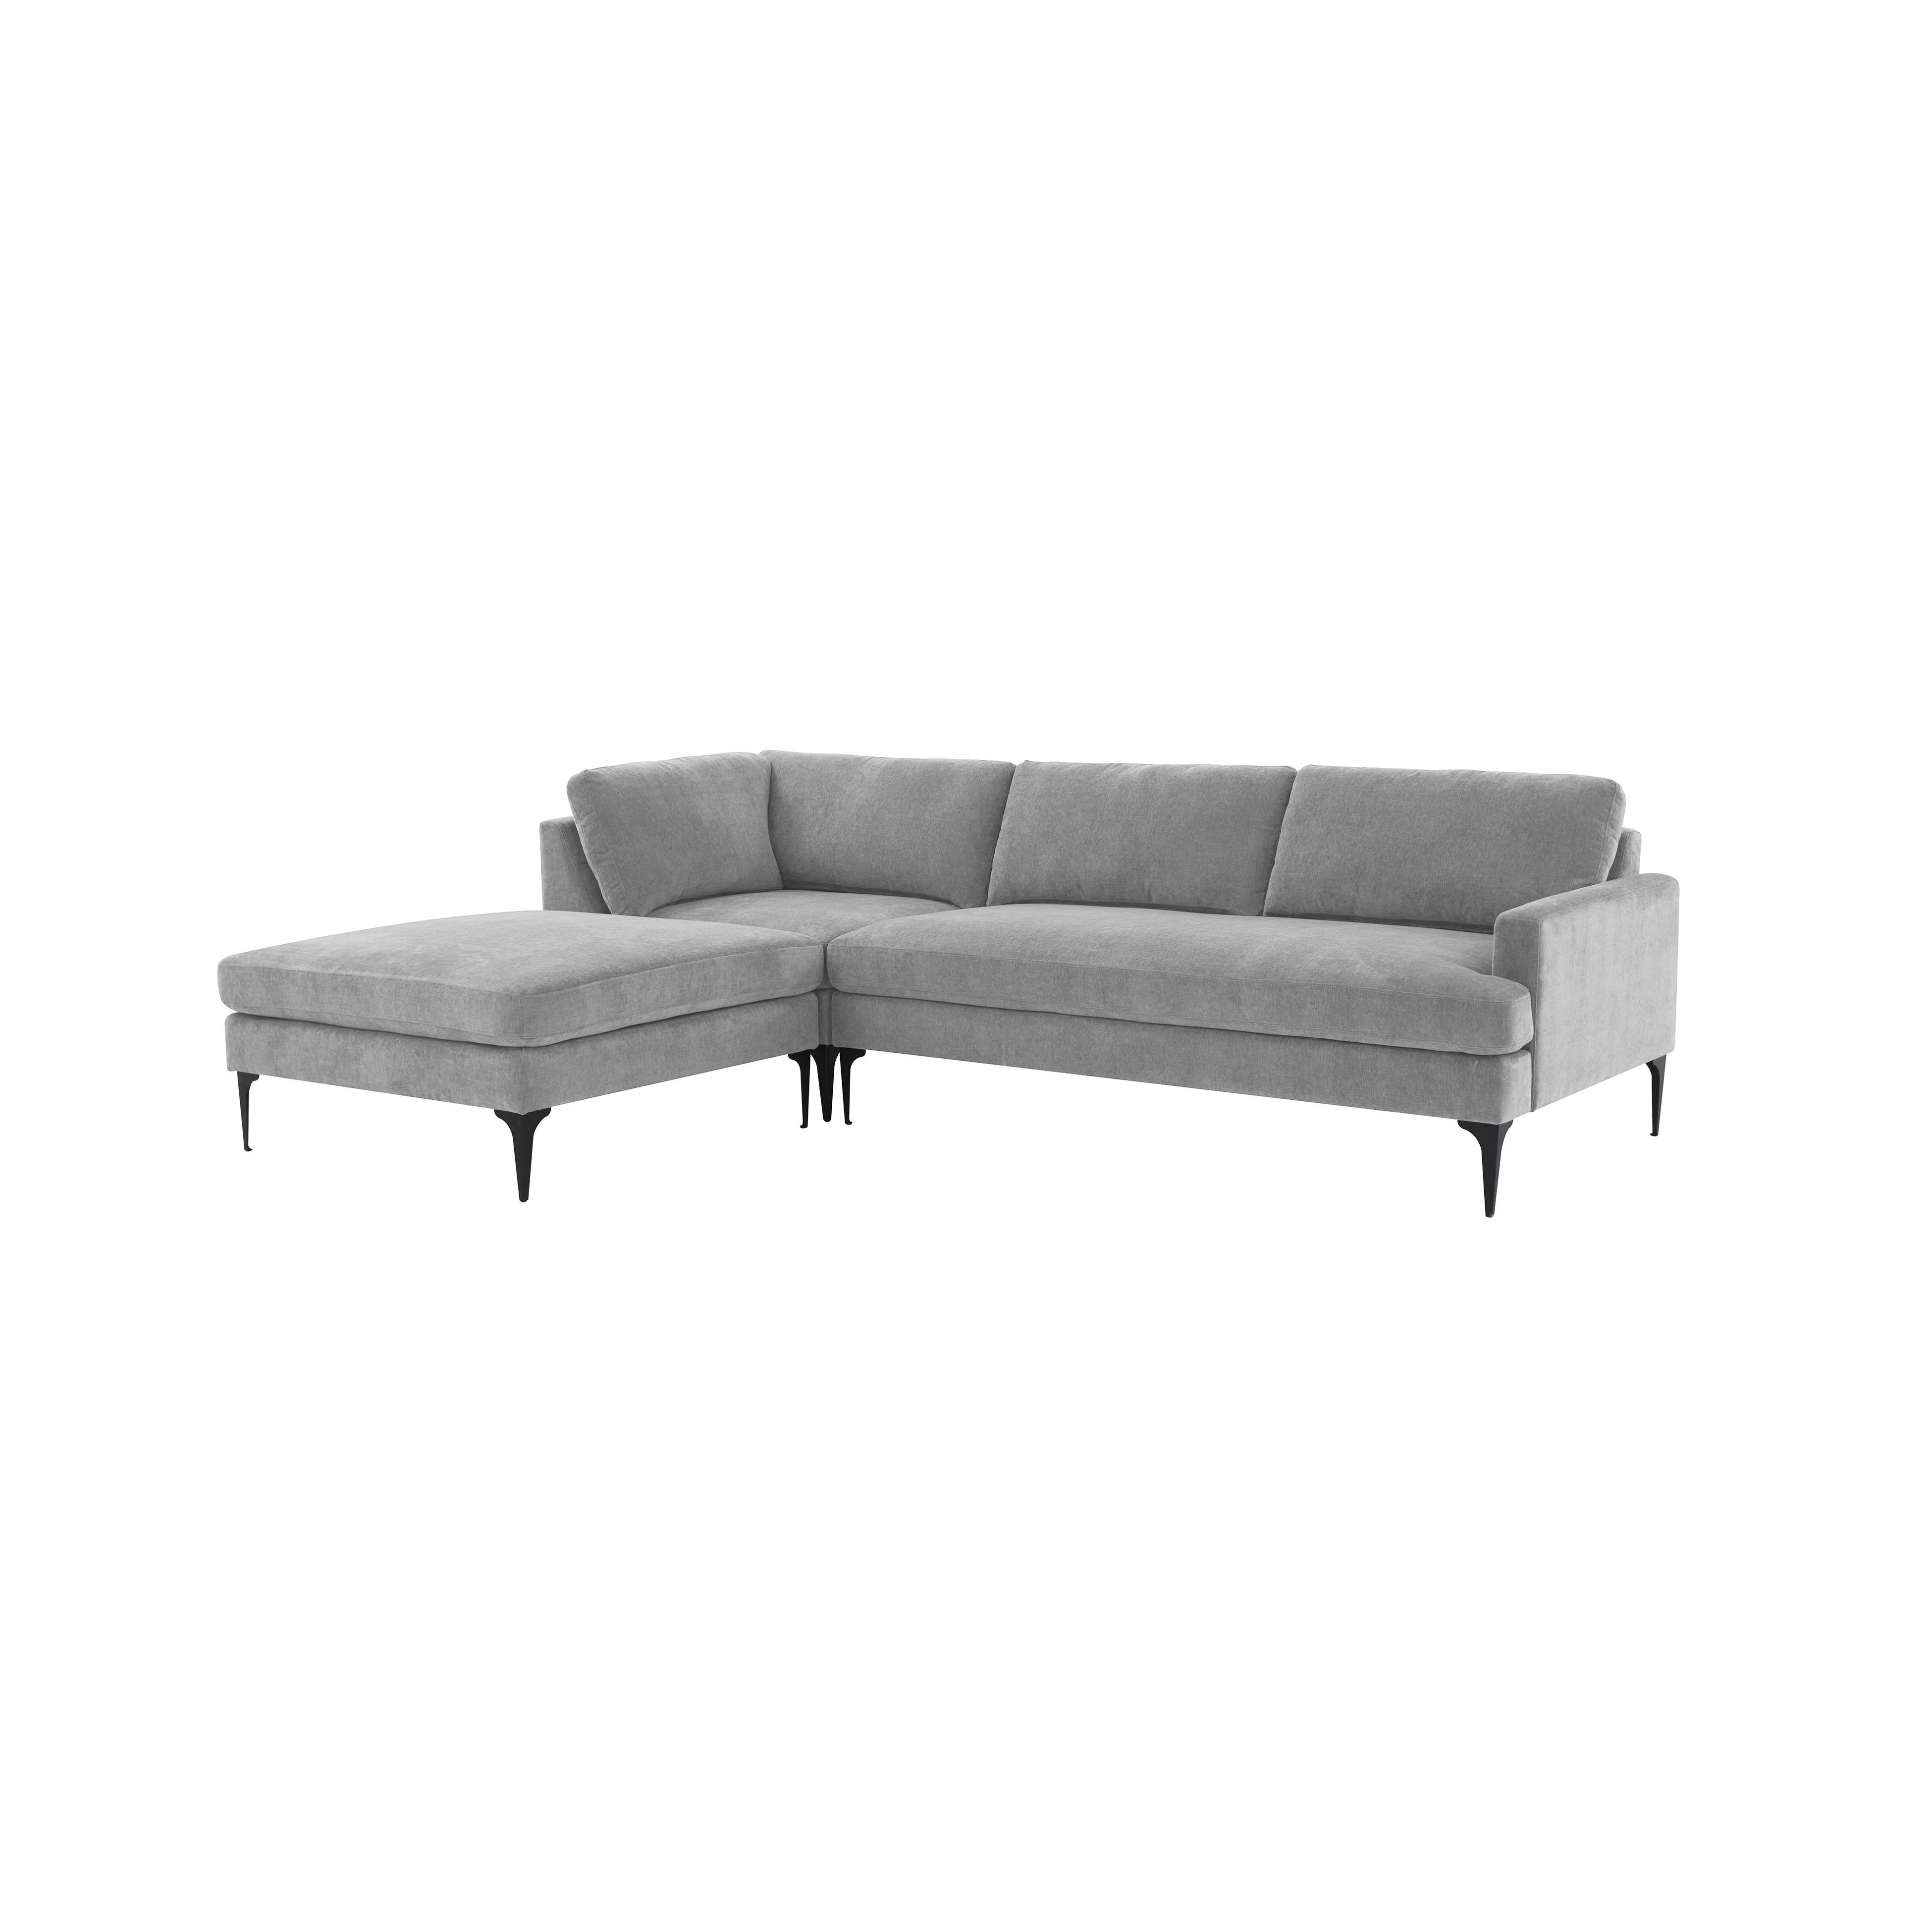 Tov Furniture Sectionals - Serena Gray Velvet LAF Chaise Sectional with Black Legs